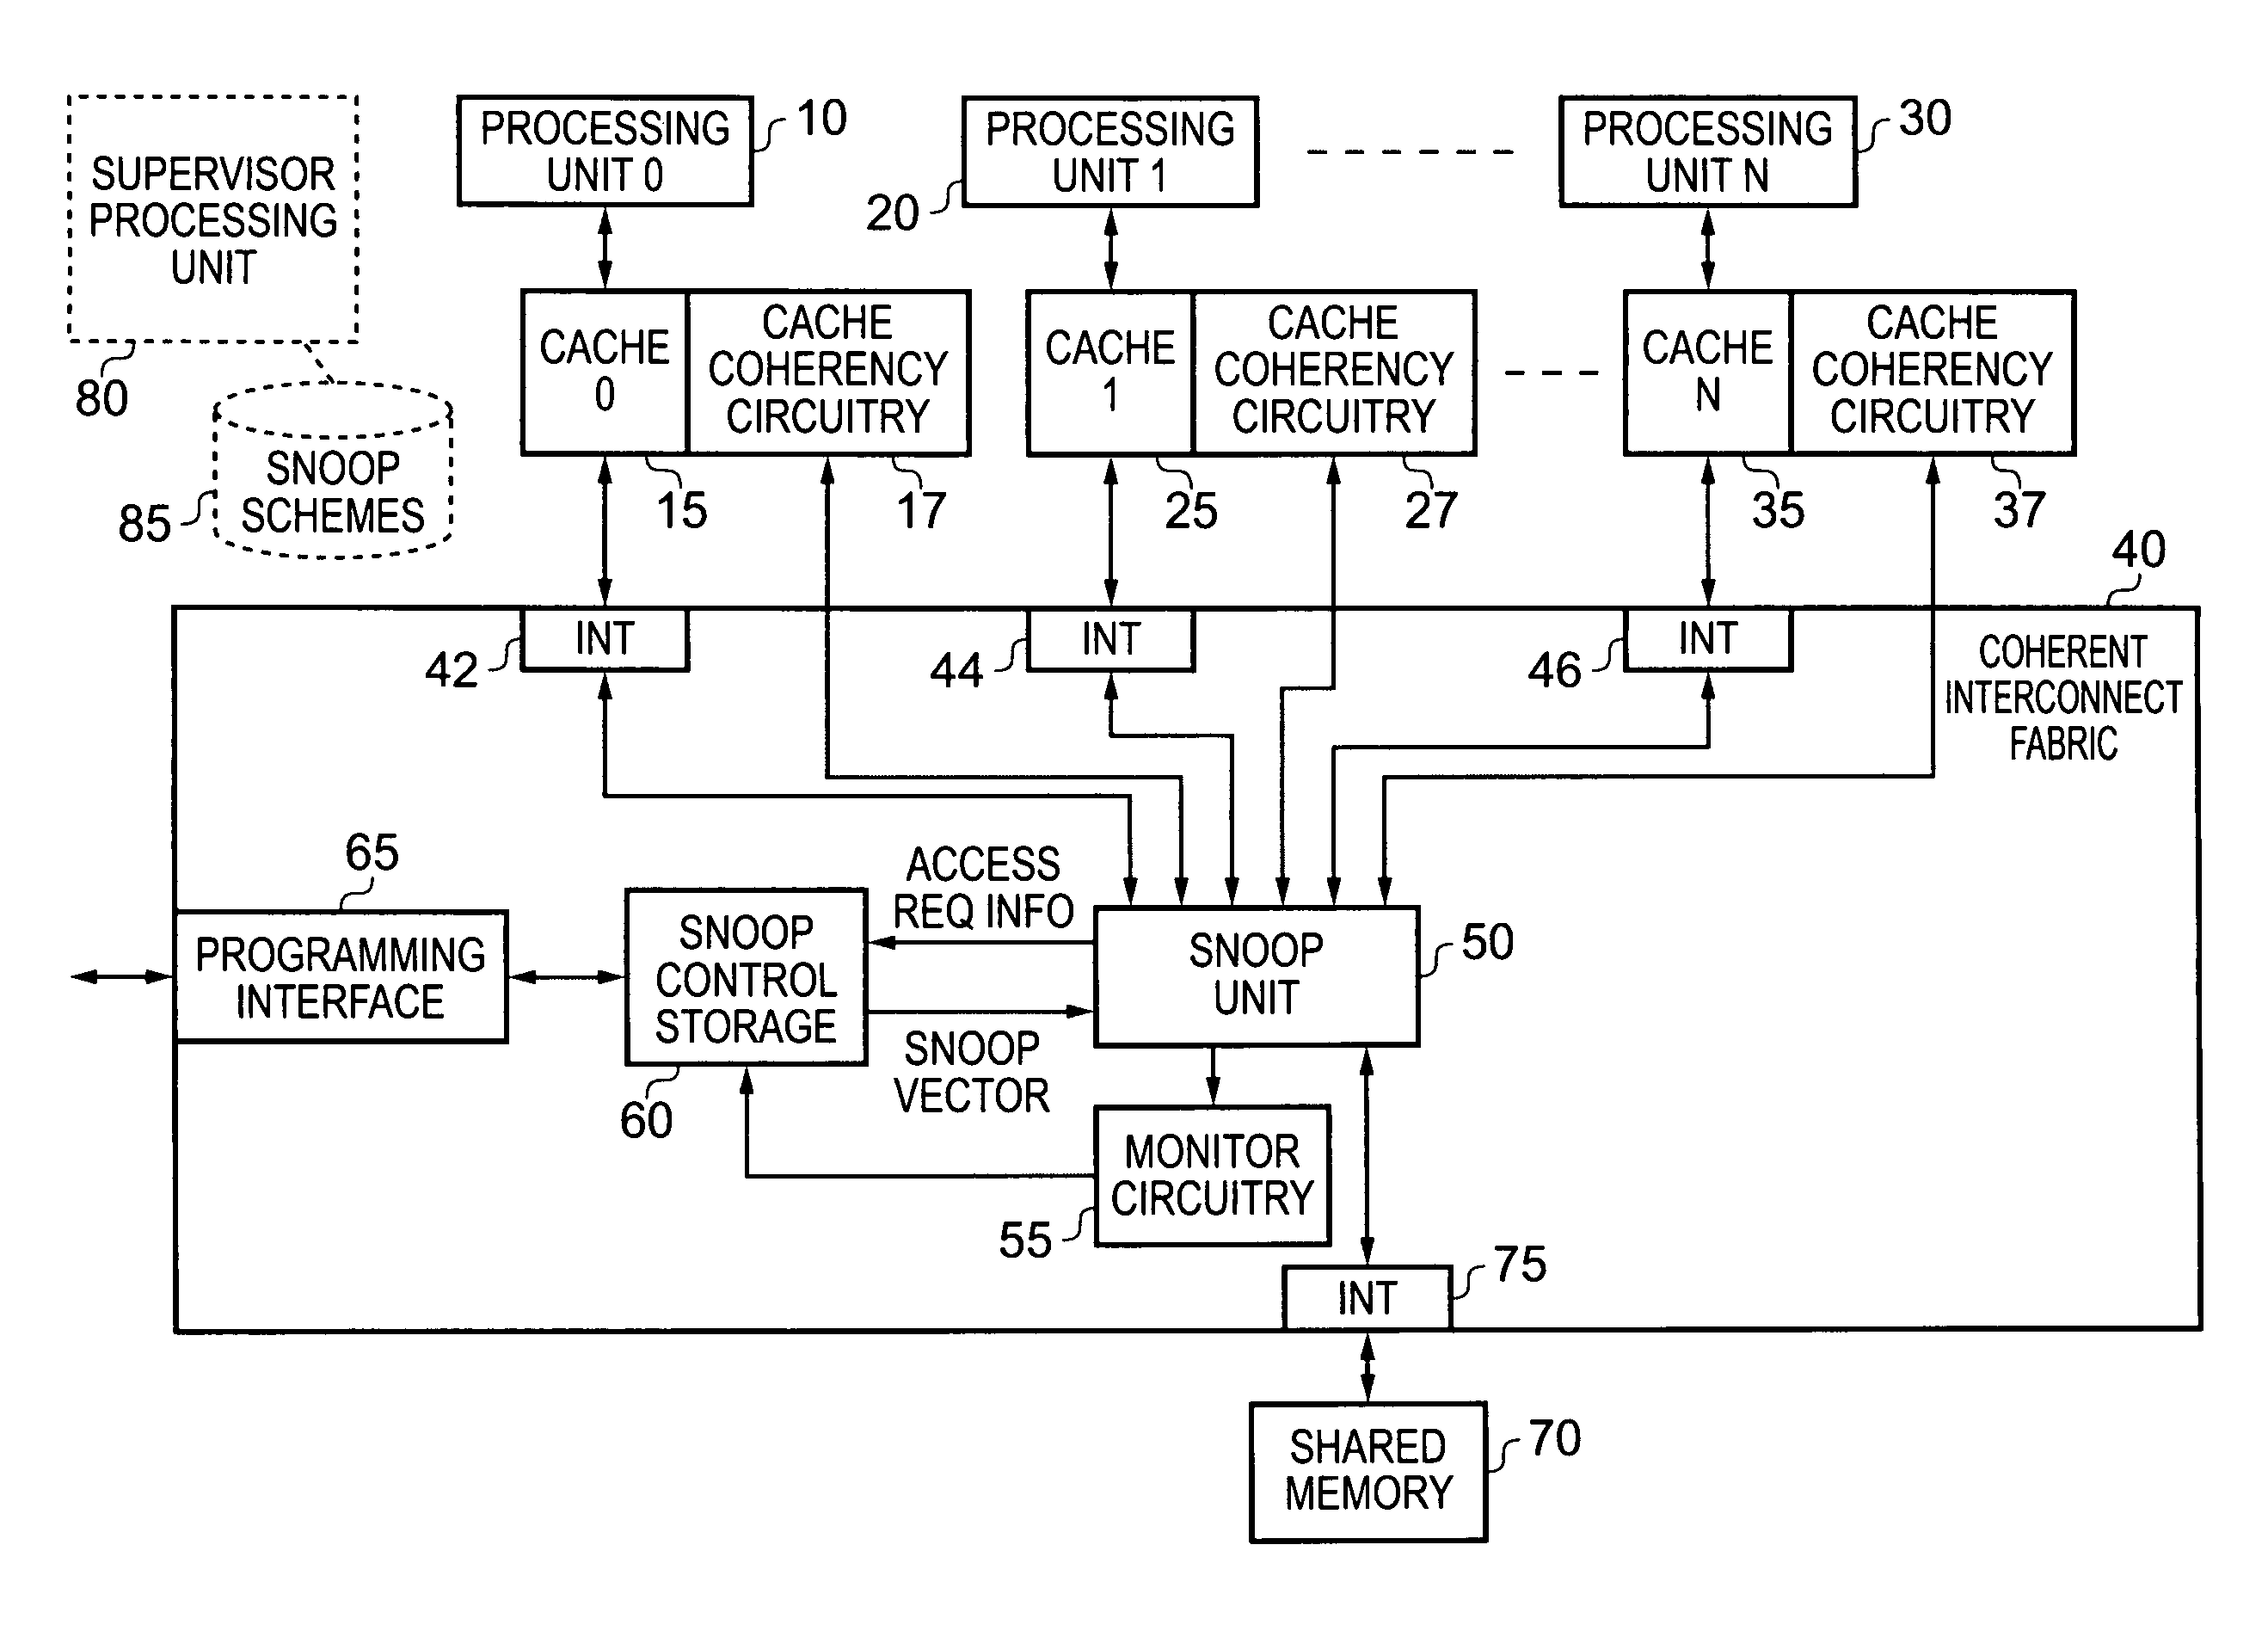 Data processing apparatus and method for managing snoop operations